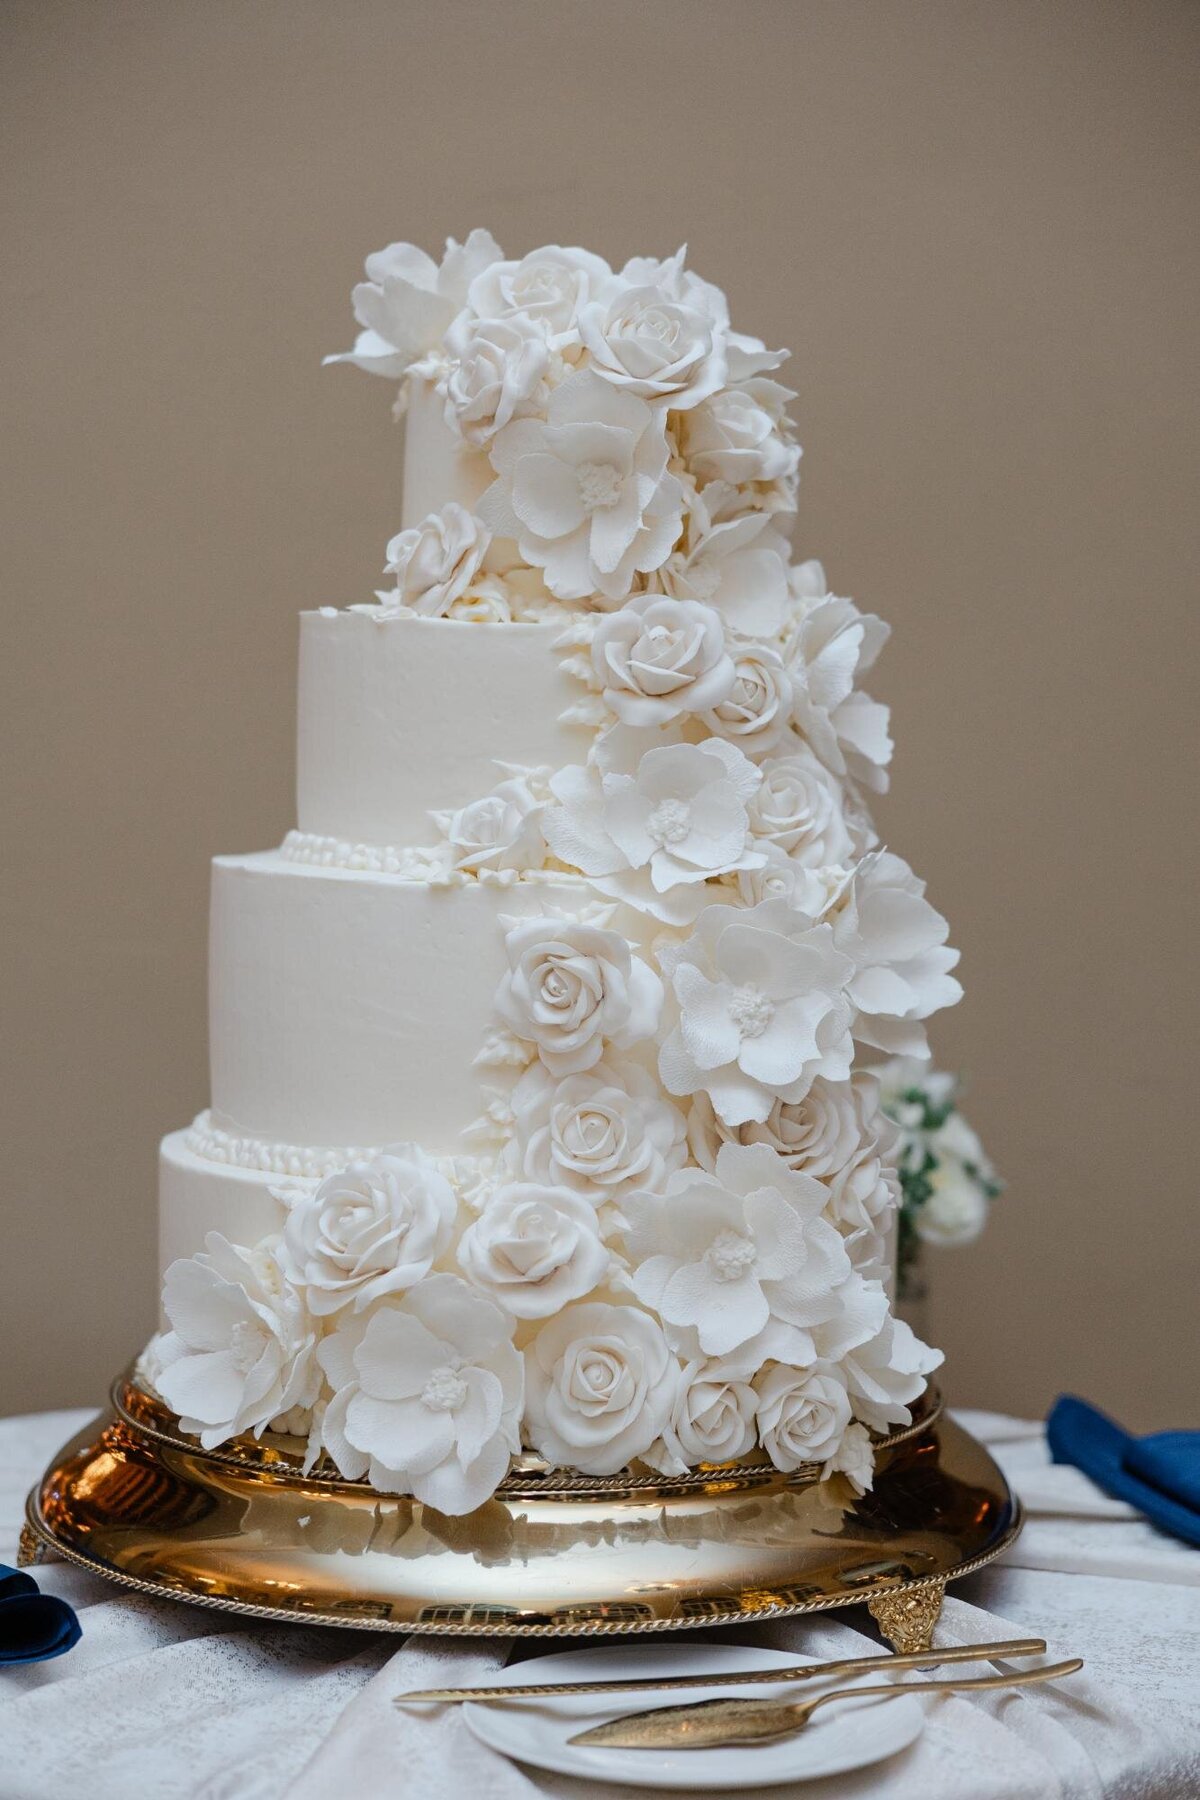 A multi-tiered white wedding cake adorned with delicate white flowers, displayed on a gold plate with serving utensils.